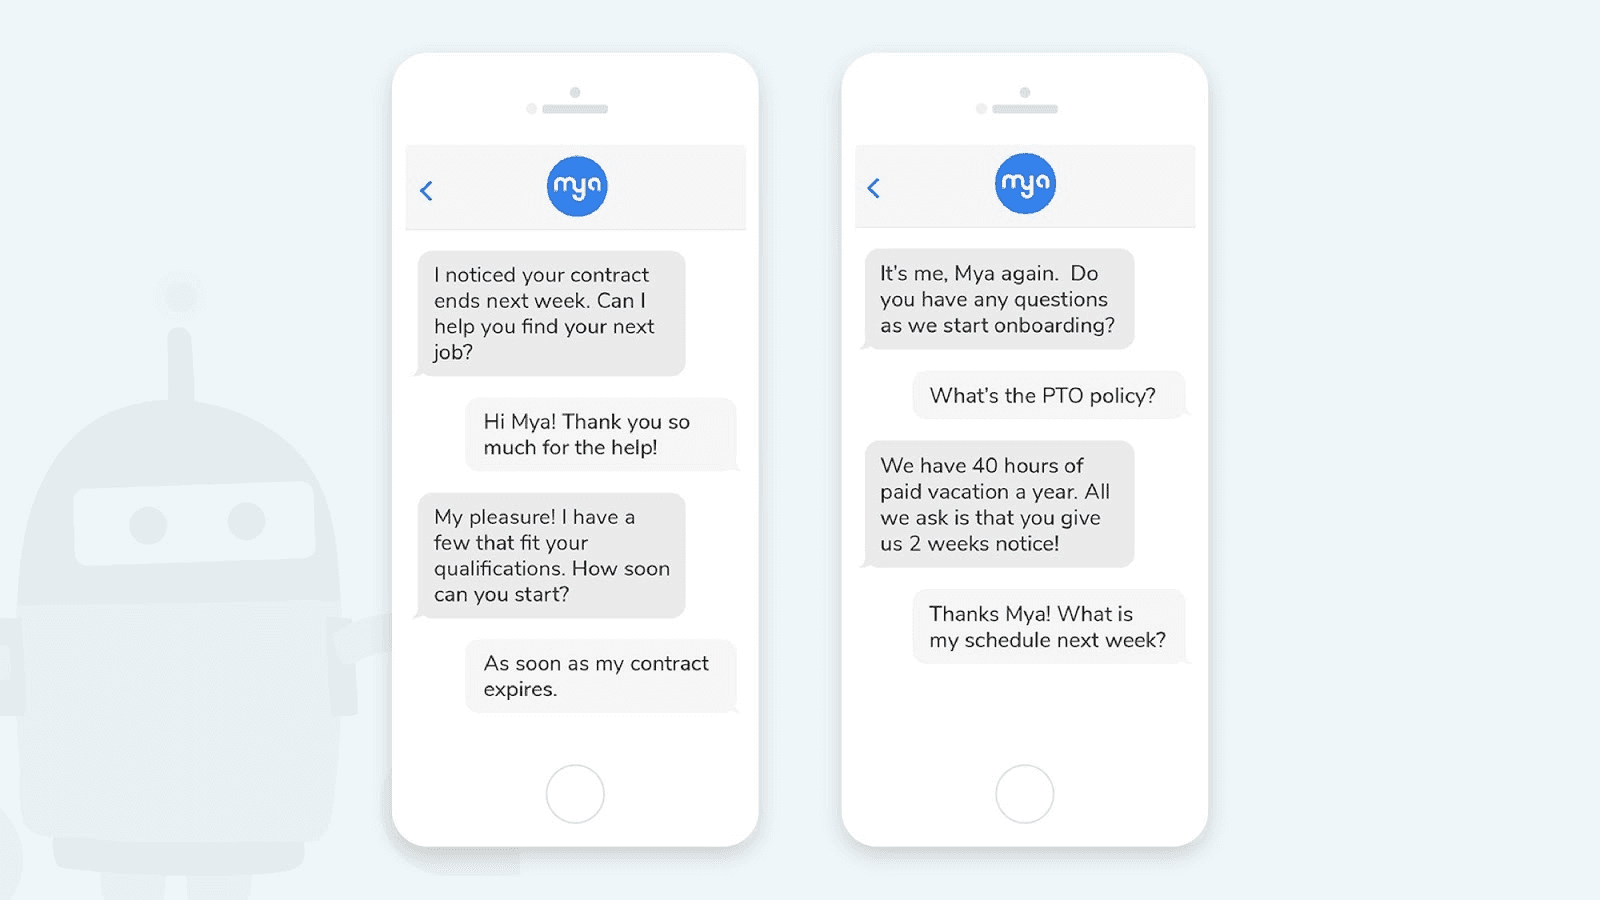 An example of an HR Chatbot called Mya, that uses AI